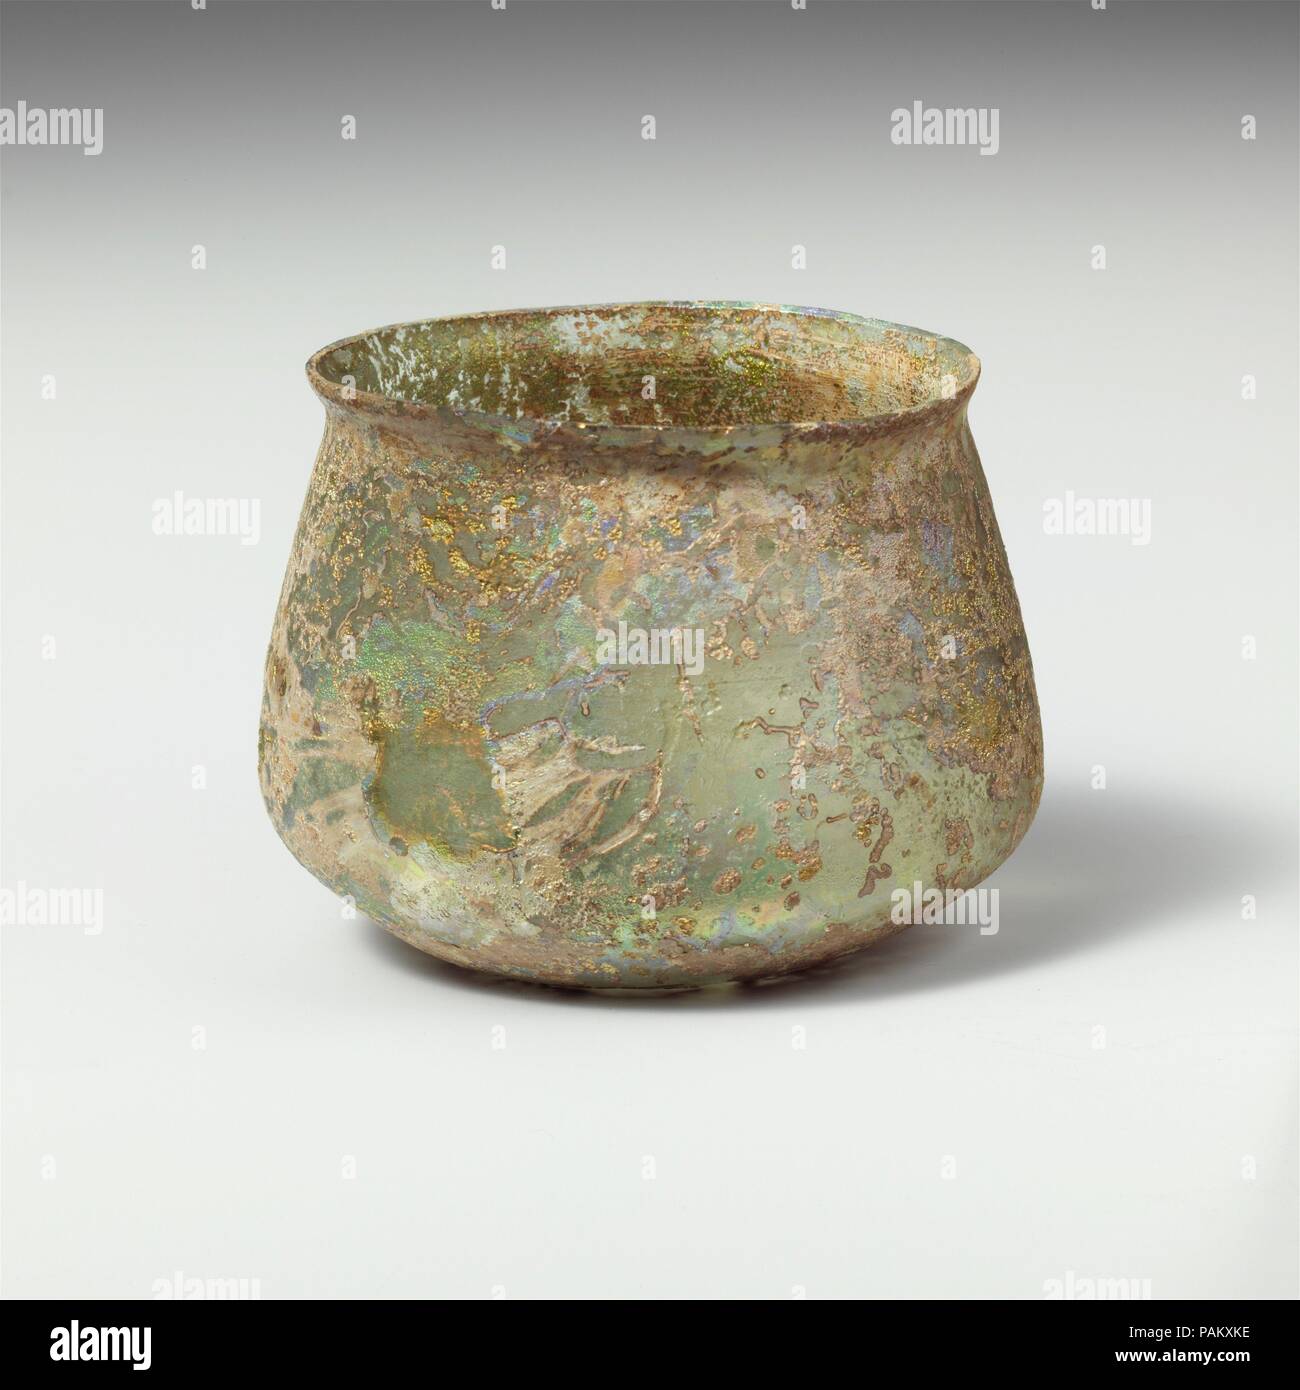 Glass cup. Culture: Roman. Dimensions: Overall: 2 3/4in. (6.9cm)  Diam.: 3 11/16 x 3 1/8 in. (9.4 x 7.9 cm). Date: 2nd-3rd century A.D..  Colorless with blue green tinge.  Knocked-off, uneven rim; slightly bulging collar below rim; sides expanding downward, then angled in to join bottom with pushed-in center.  Band of faint wheel-abraded horizontal lines on body above angle.  Intact; many pinprick bubbles; dulling, deep pitting, and brilliant iridescent weathering on exterior; only faint weathering on interior. Museum: Metropolitan Museum of Art, New York, USA. Stock Photo